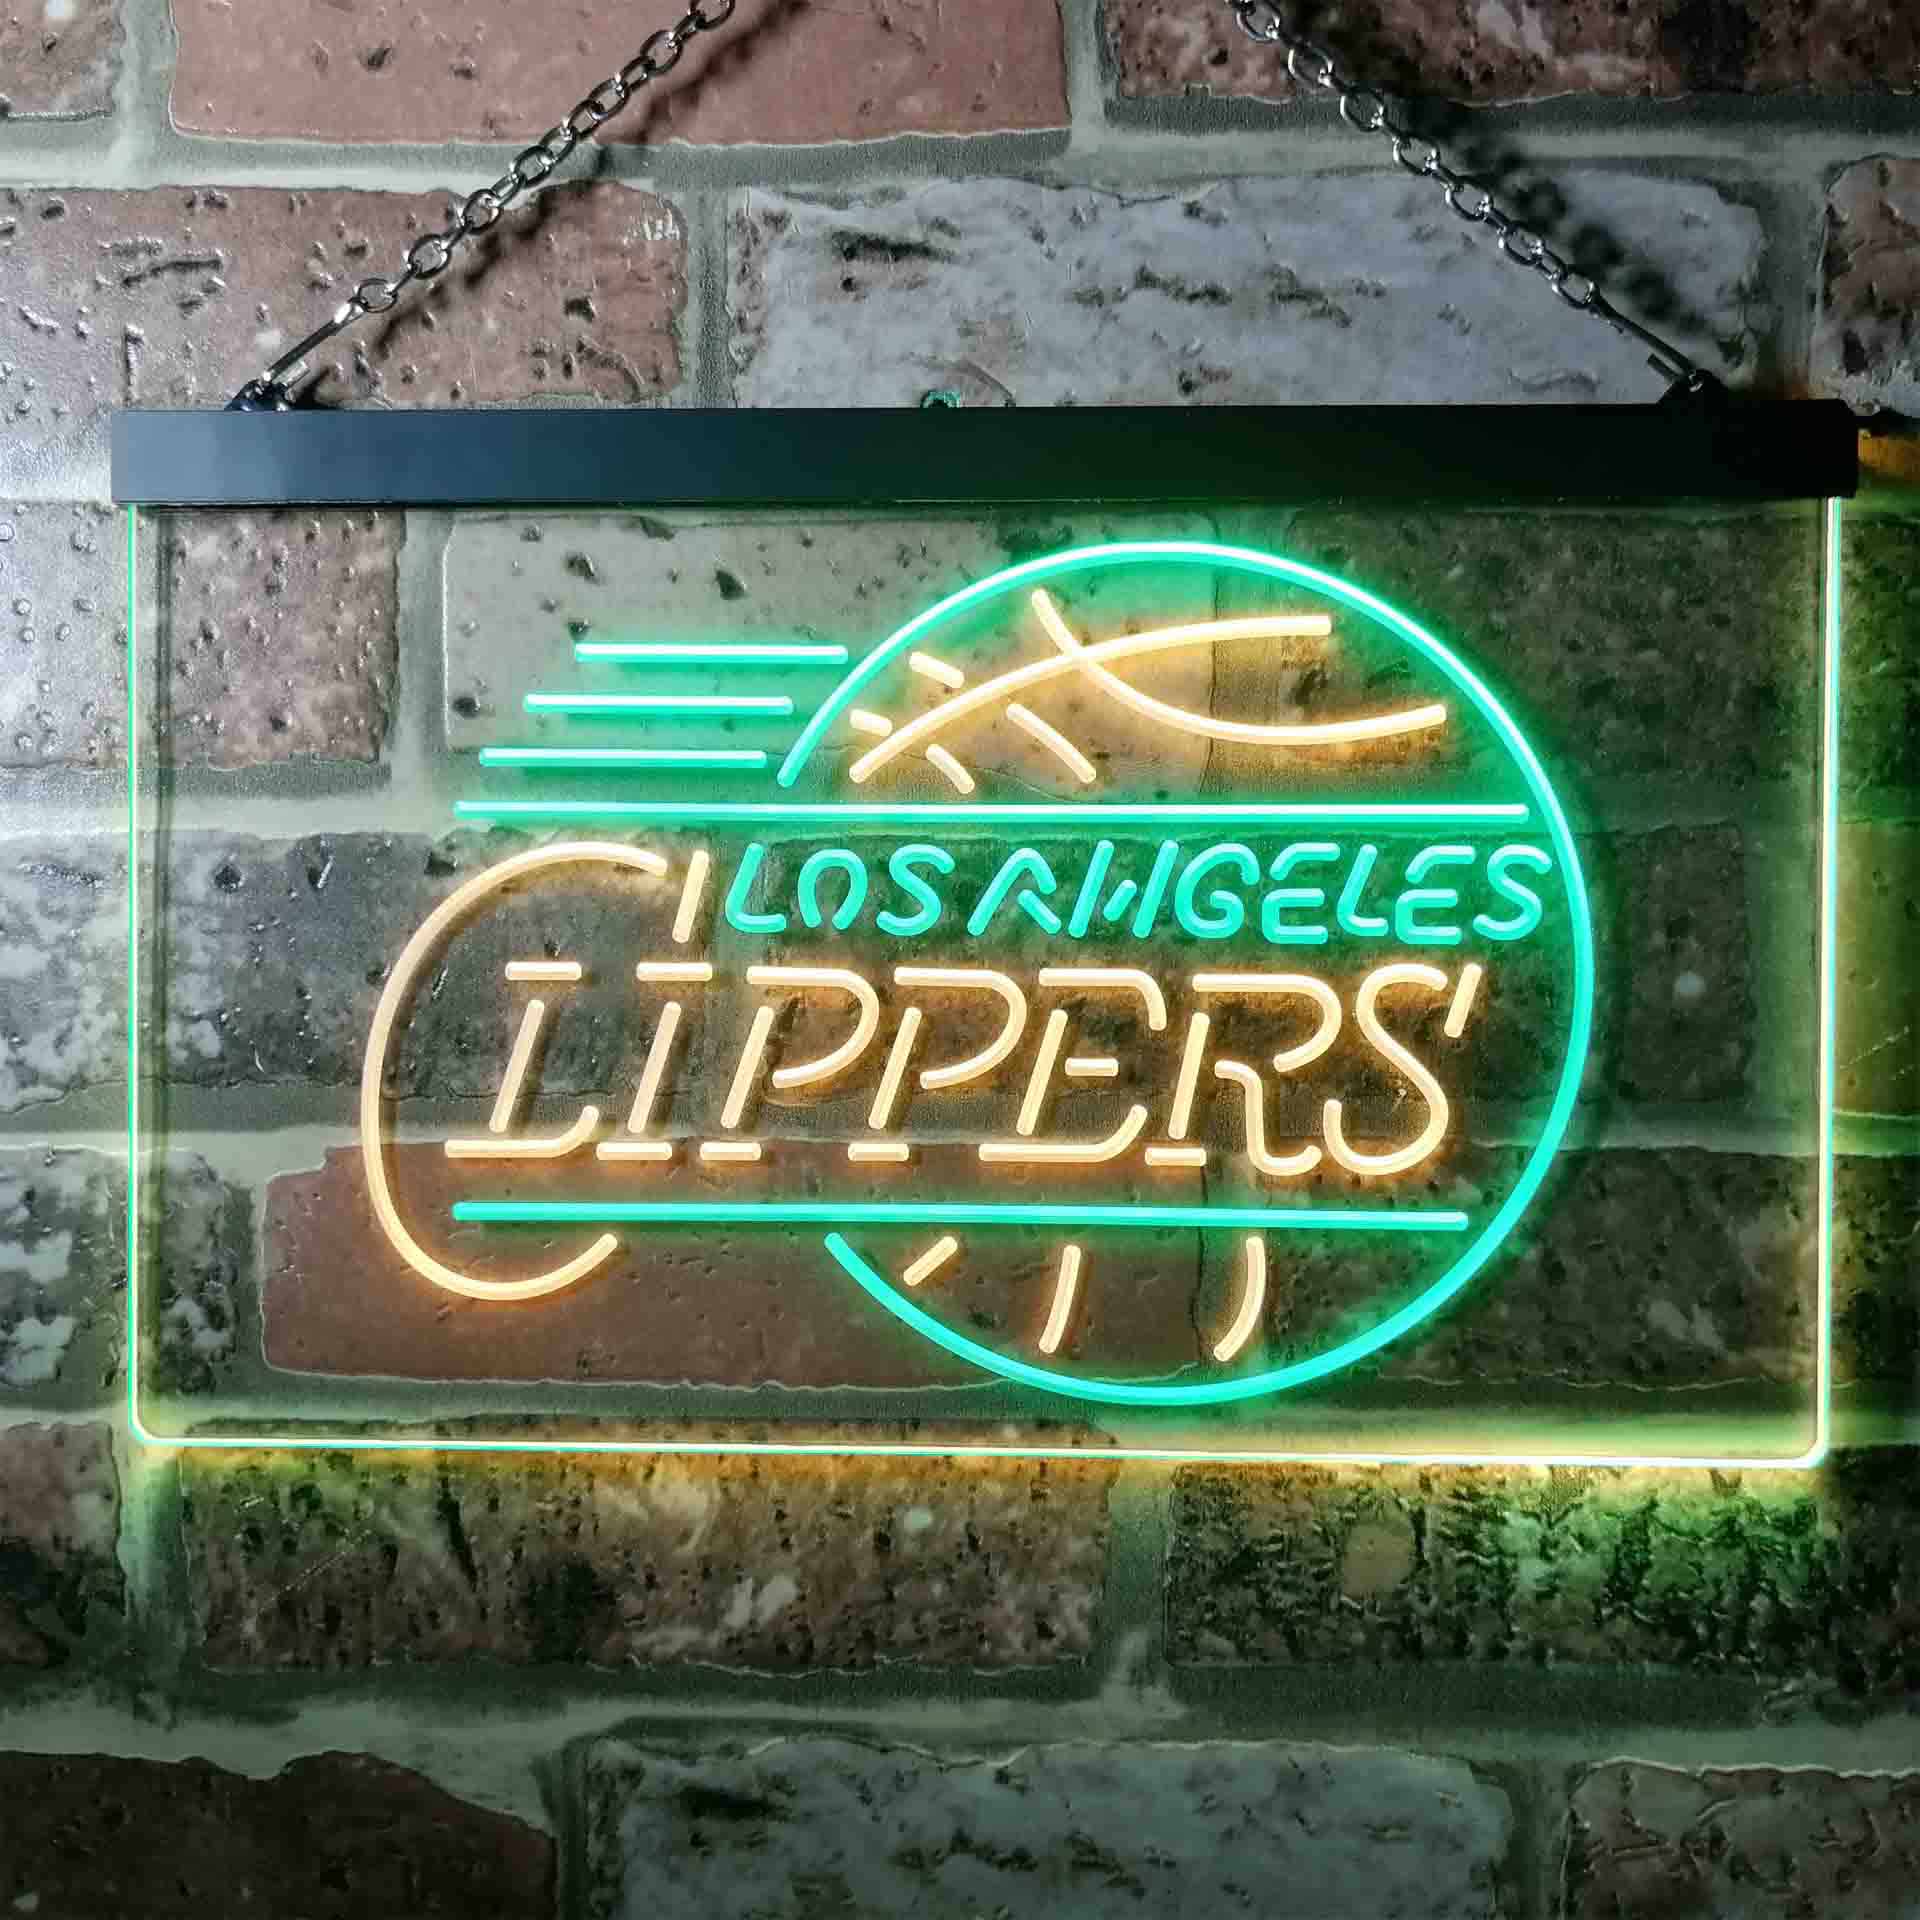 Los Angeles Clippers Baseketball Neon-Like LED Sign